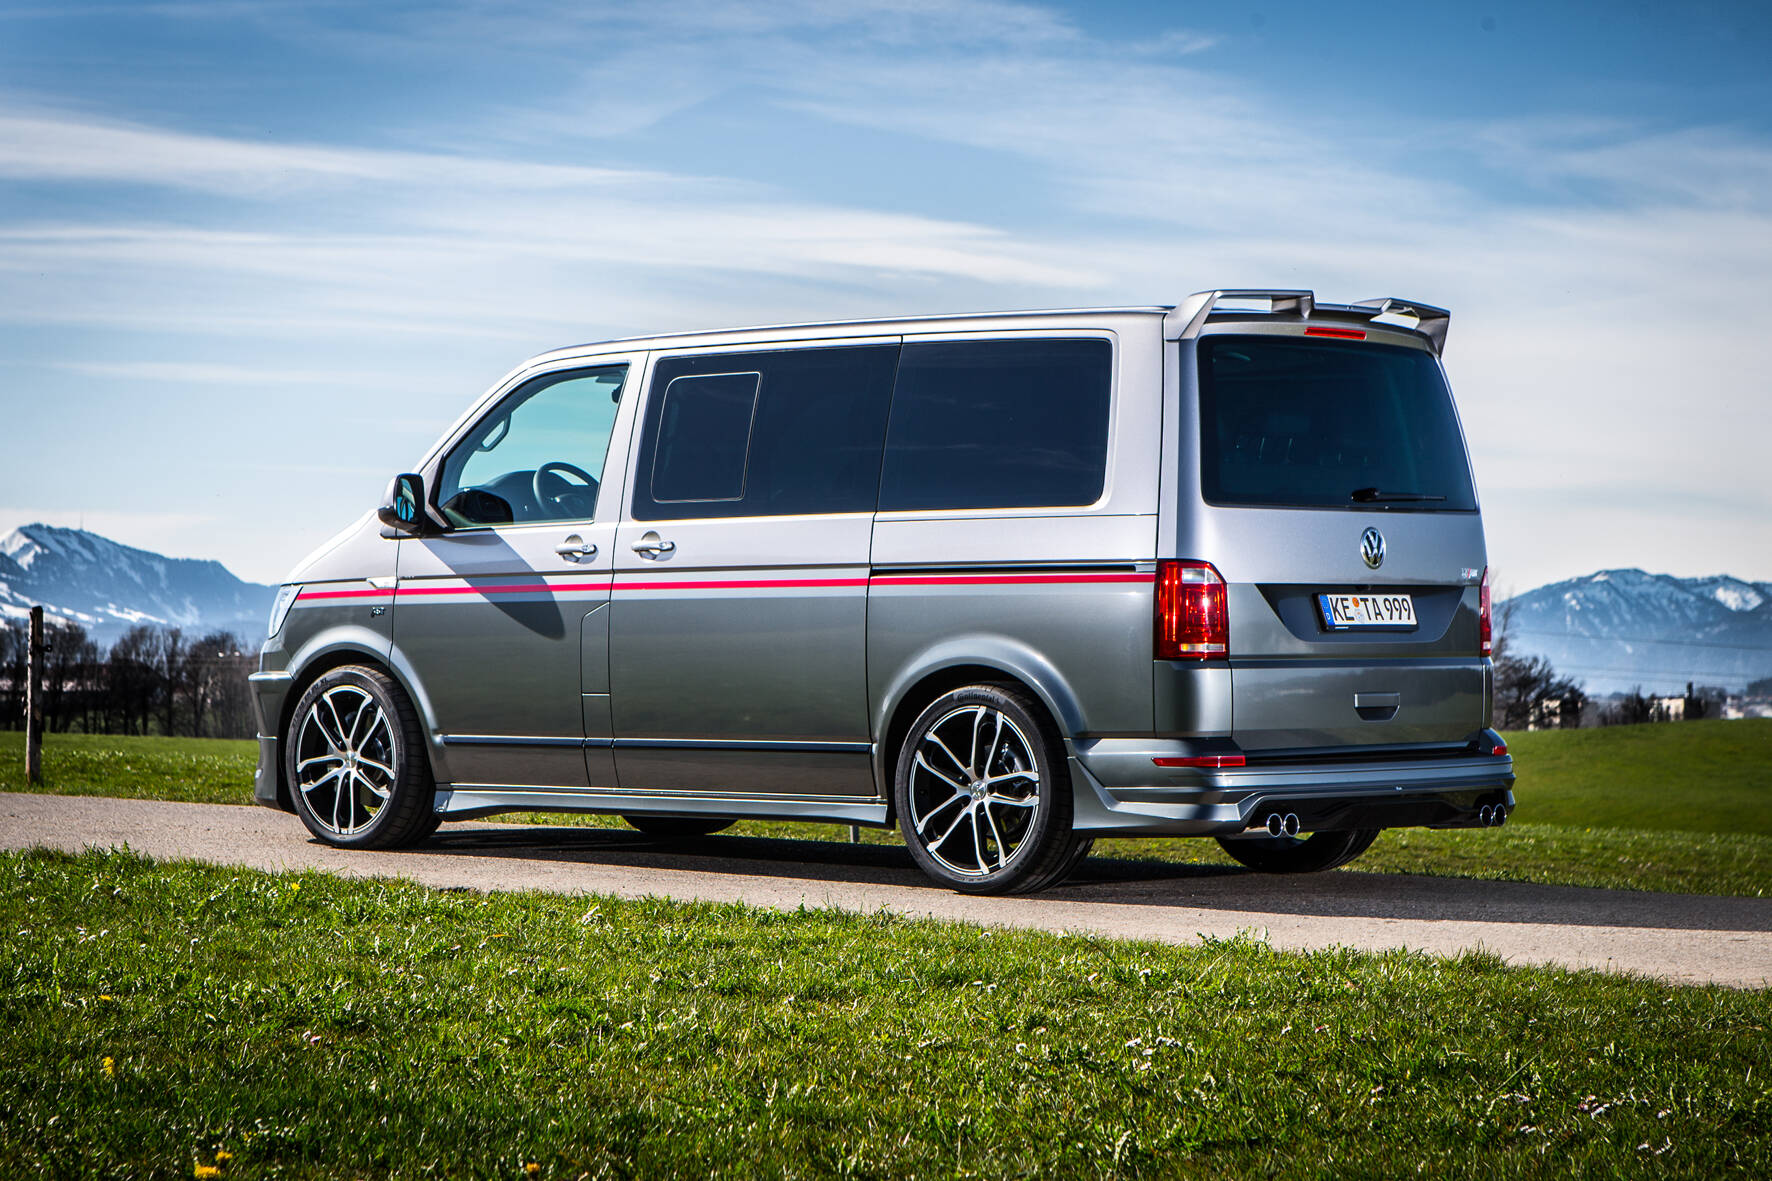 Speed meets space – the Volkswagen T5 promotion model by ABT Sportsline -  Audi Tuning, VW Tuning, Chiptuning von ABT Sportsline.